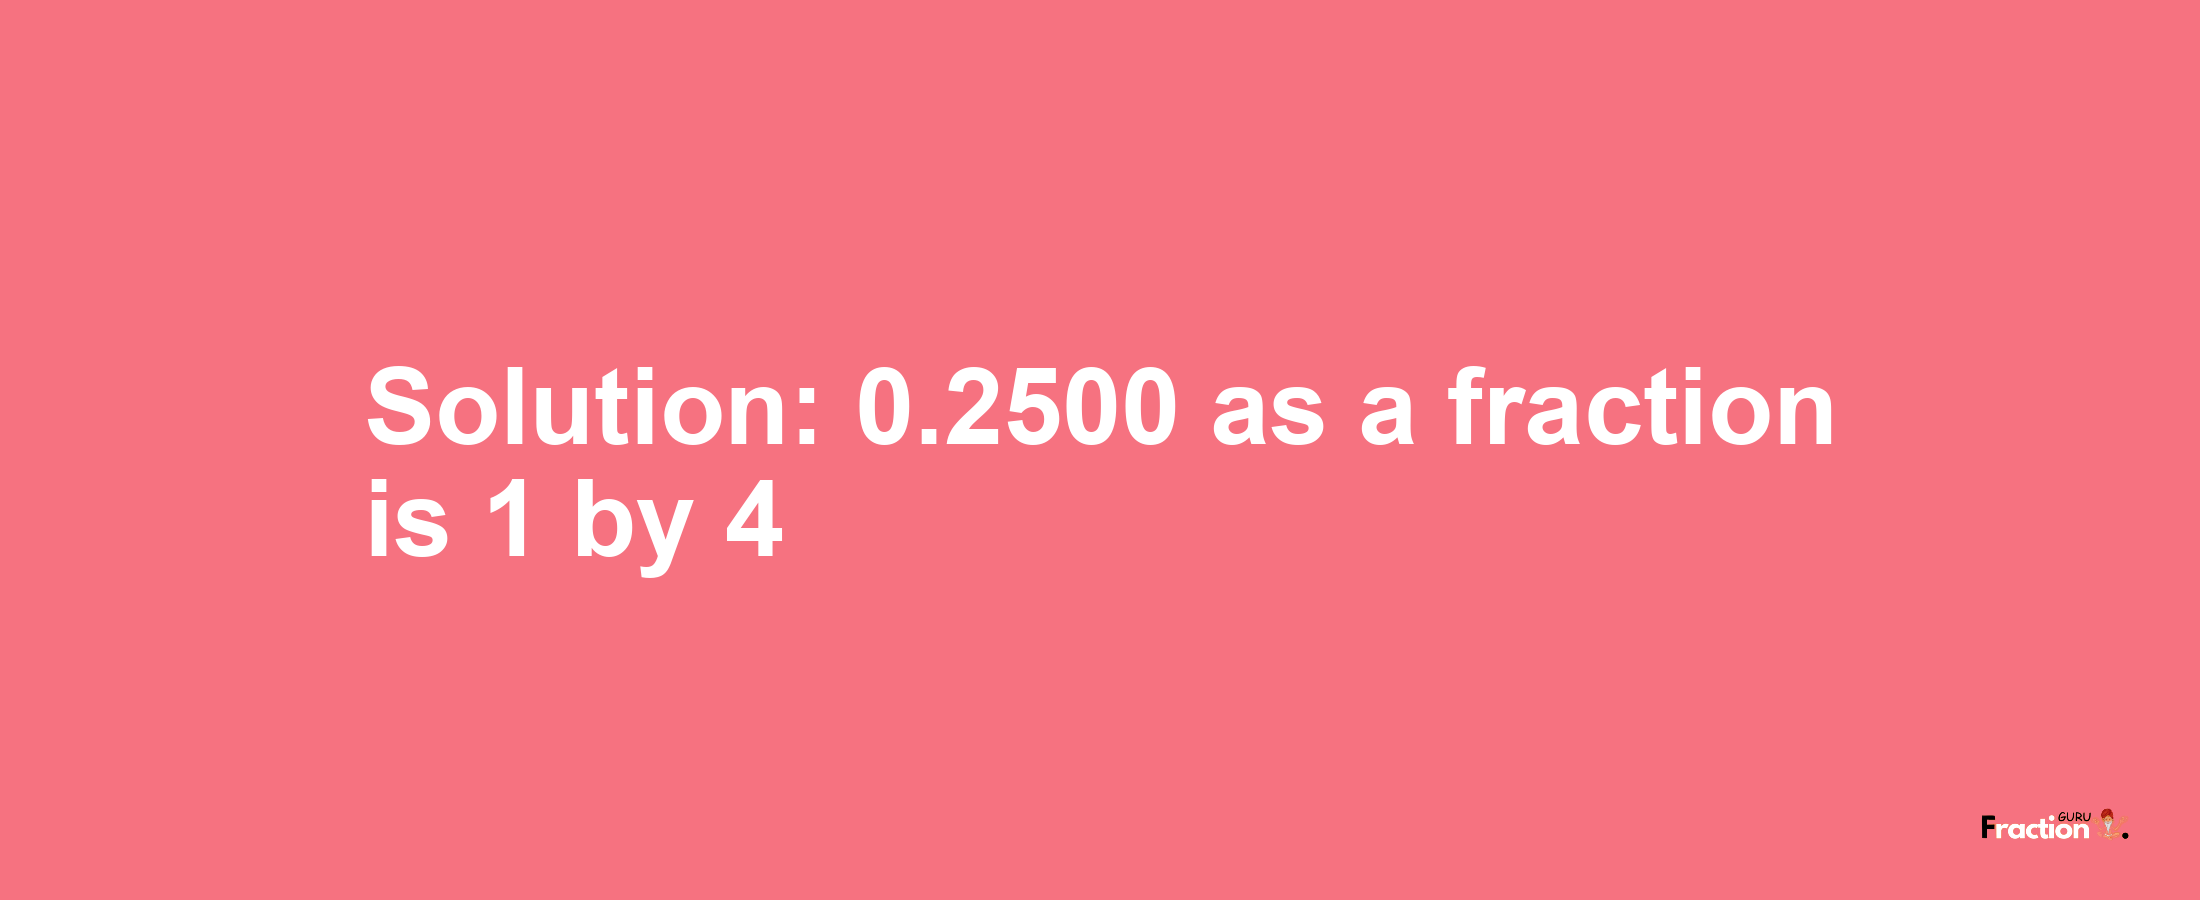 Solution:0.2500 as a fraction is 1/4